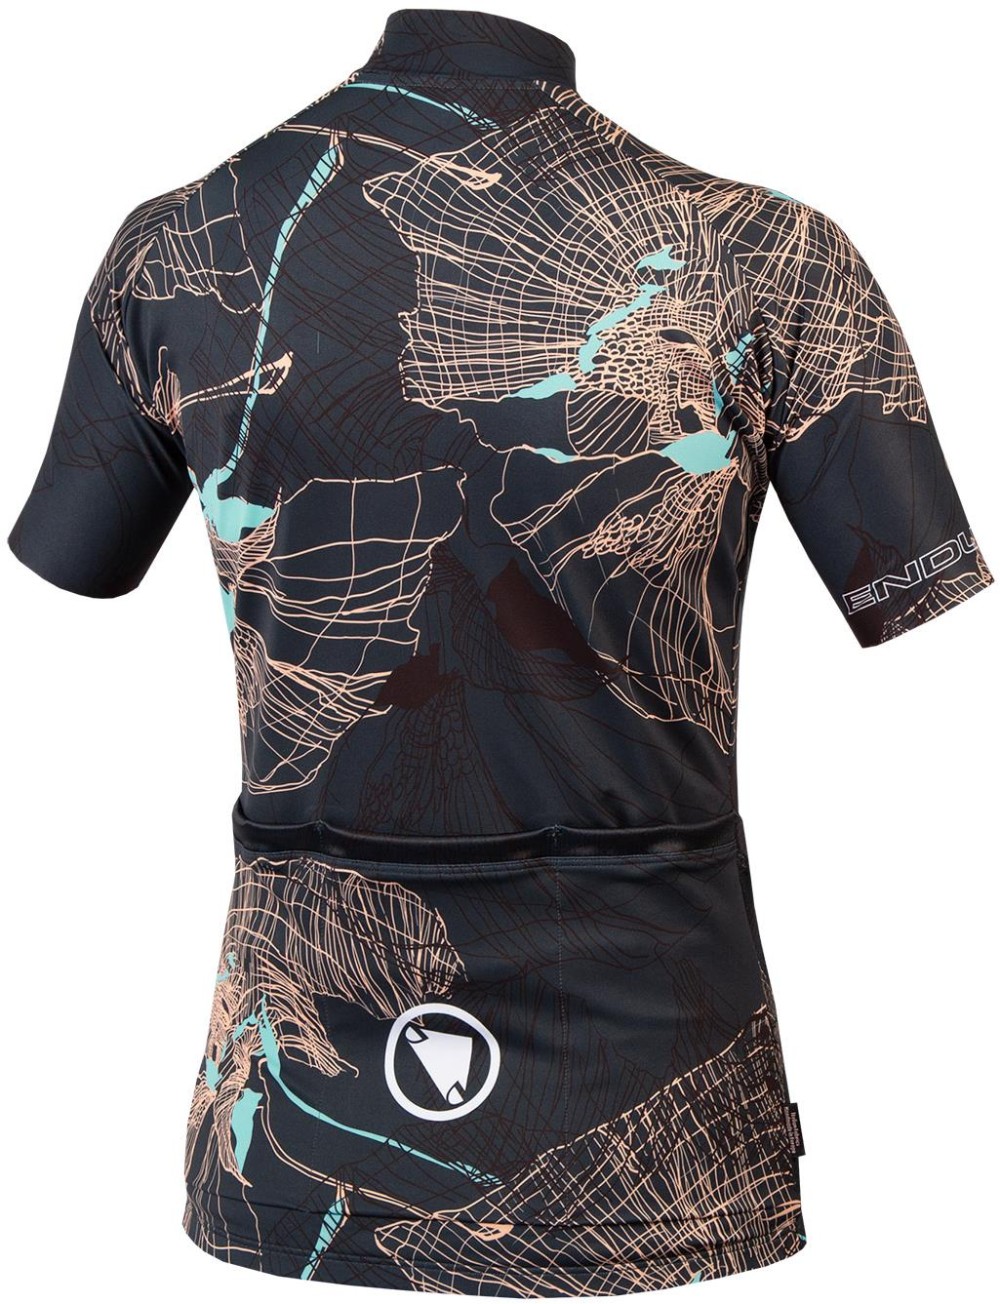 Outdoor Trail Womens Short Sleeve Cycling Jersey Limited Edition image 1